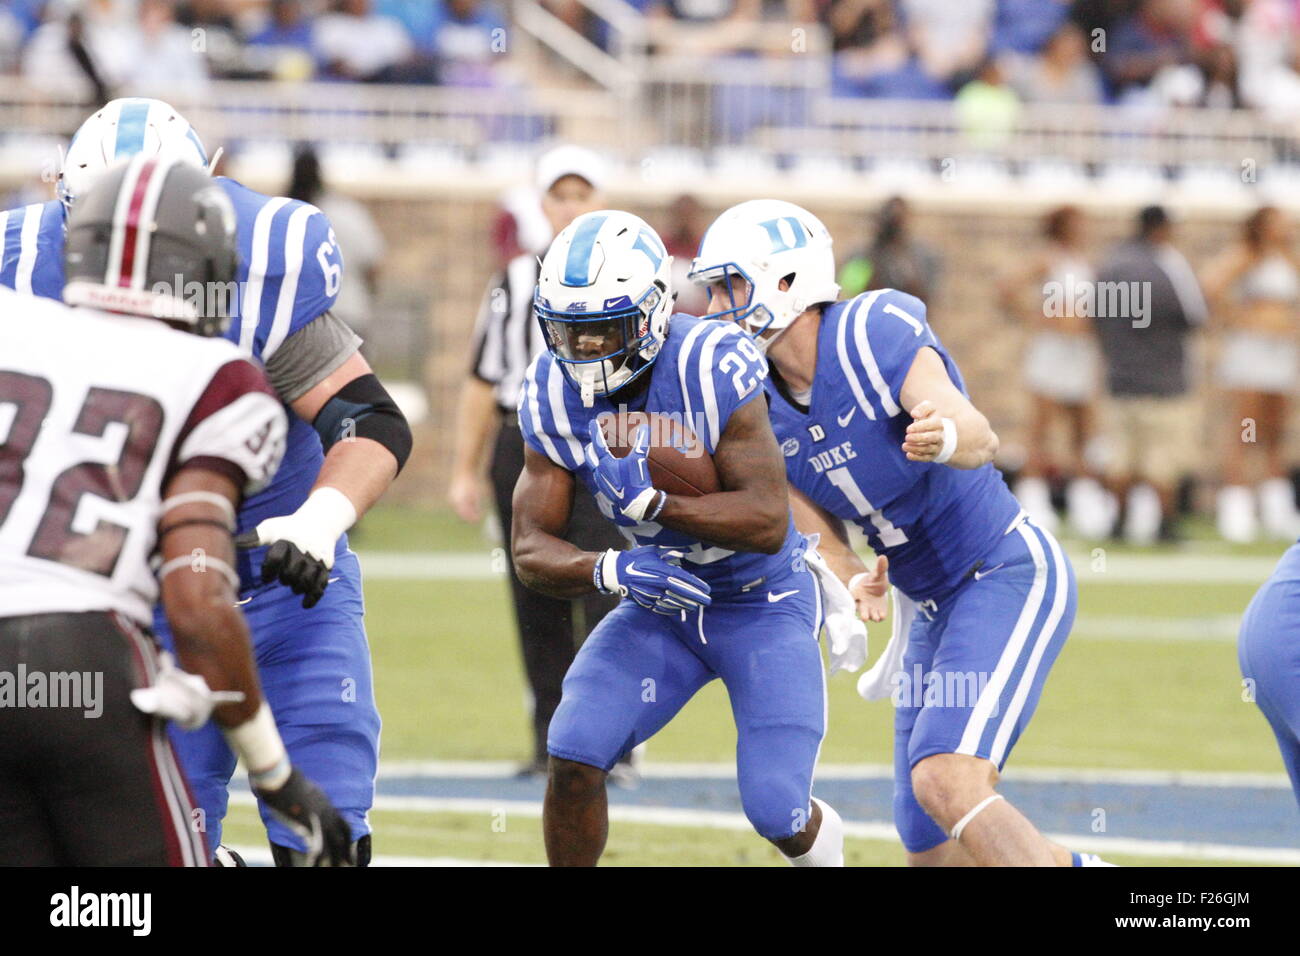 Durham, NC, USA. 12th Sep, 2015. Shaun Wilson (29) of the Duke Blue Devils gets the handoff in the first quarter of the NCAA football matchup between the NC Central Eagles and the Duke Blue Devils at Wallace Wade Stadium in Durham, NC. Scott Kinser/CSM/Alamy Live News Stock Photo